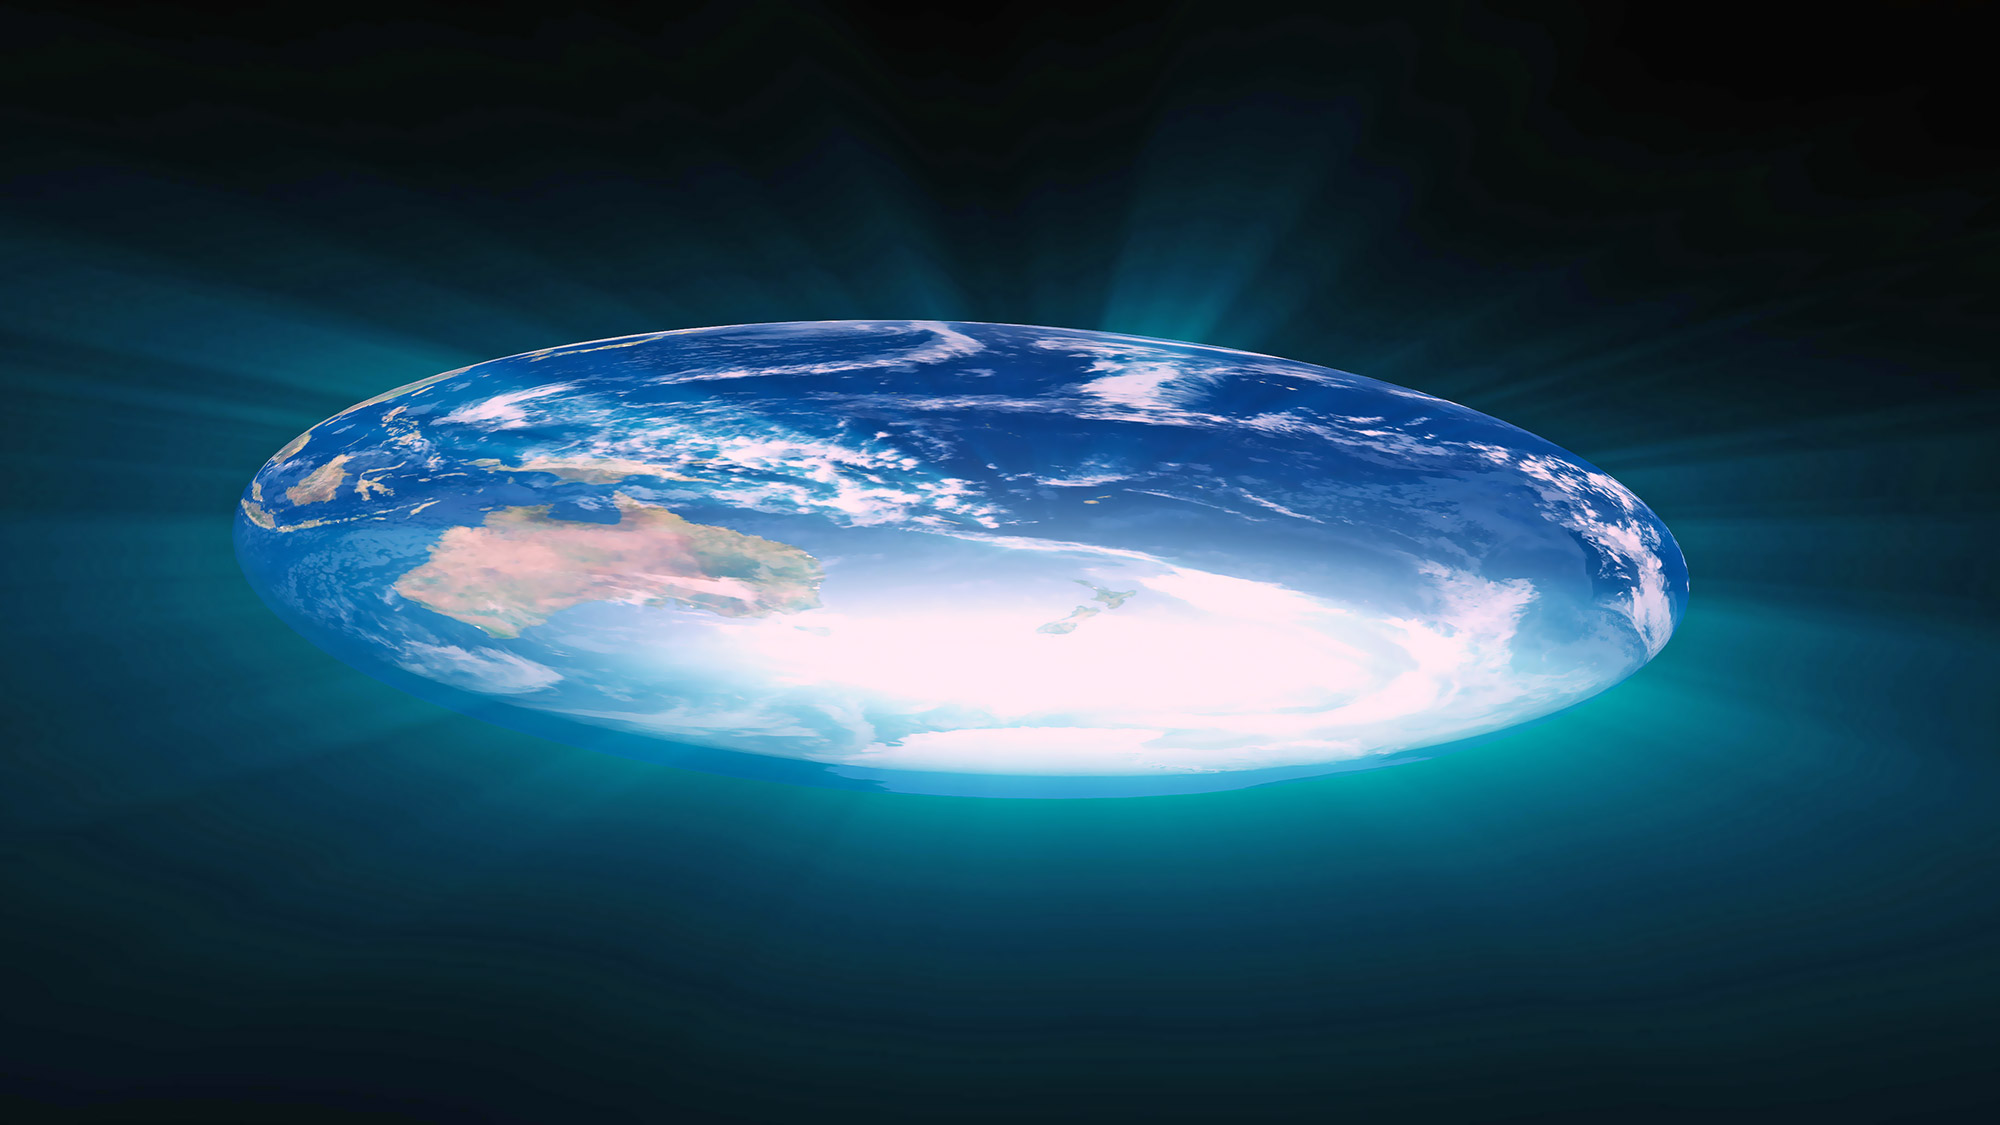 Earth rendered as a flat disk floating in space.